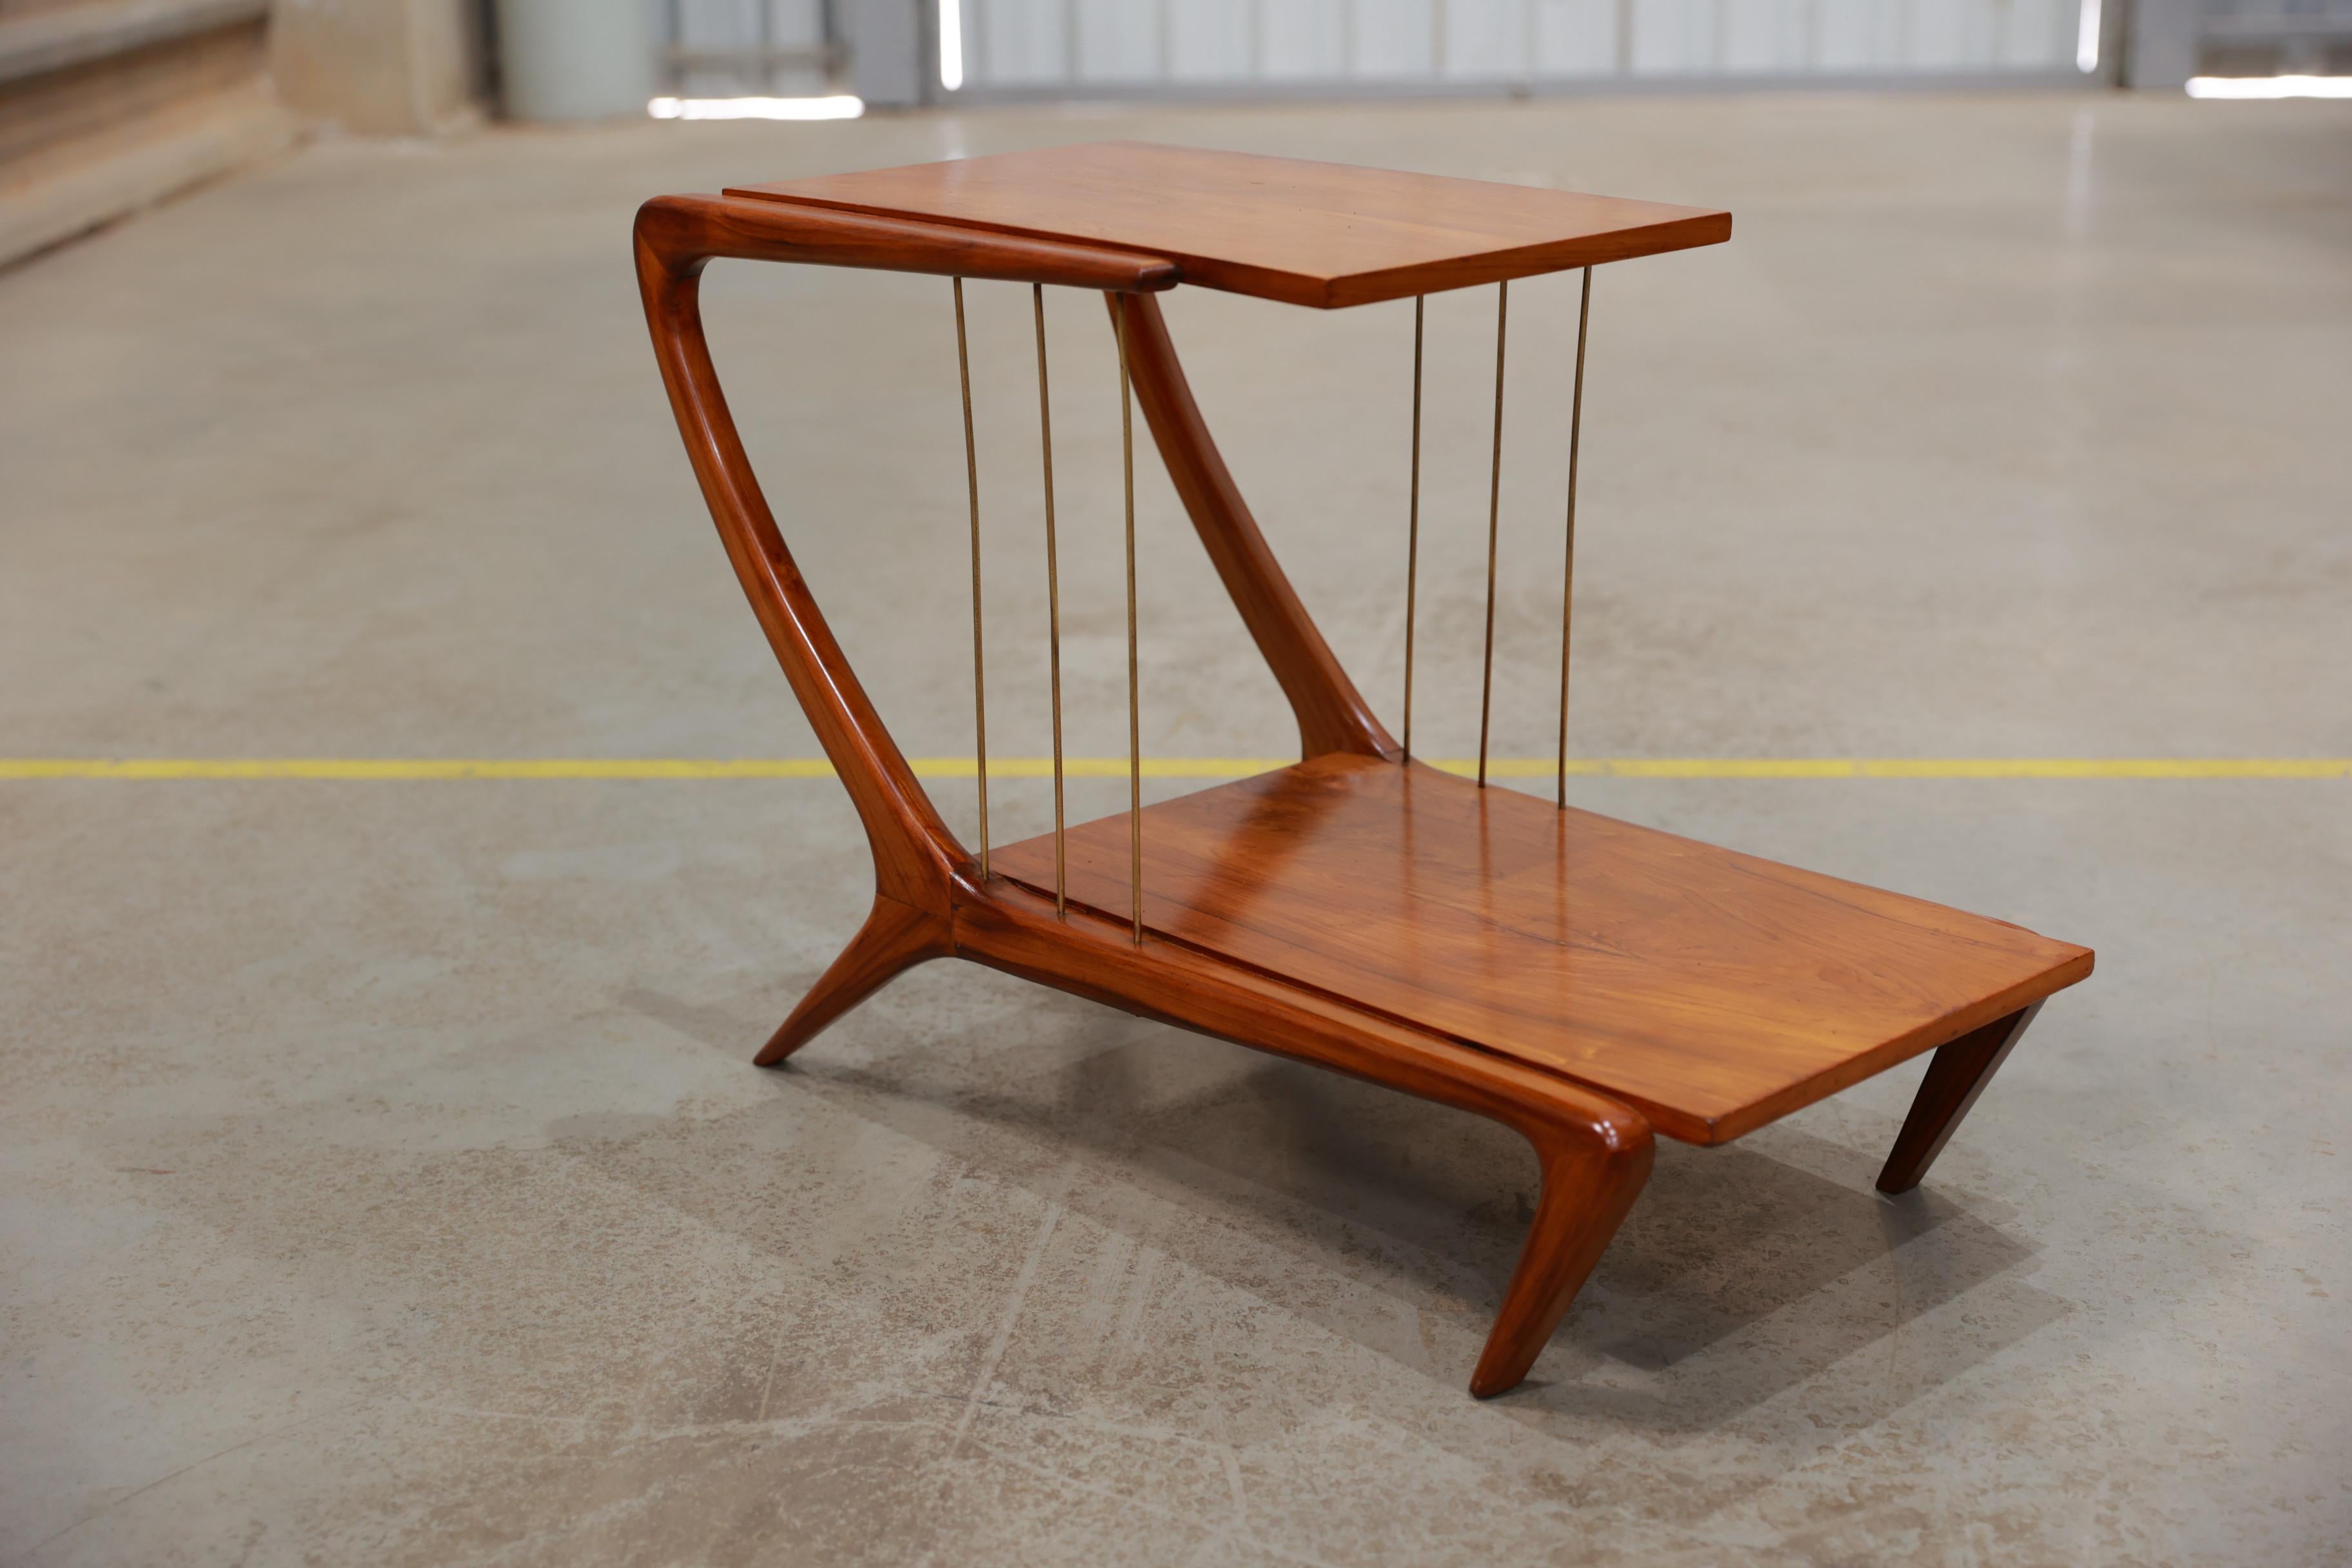 Woodwork Brazilian Modern Side Table in Hardwood by Giuseppe Scapinelli, 1950s, Brazil For Sale